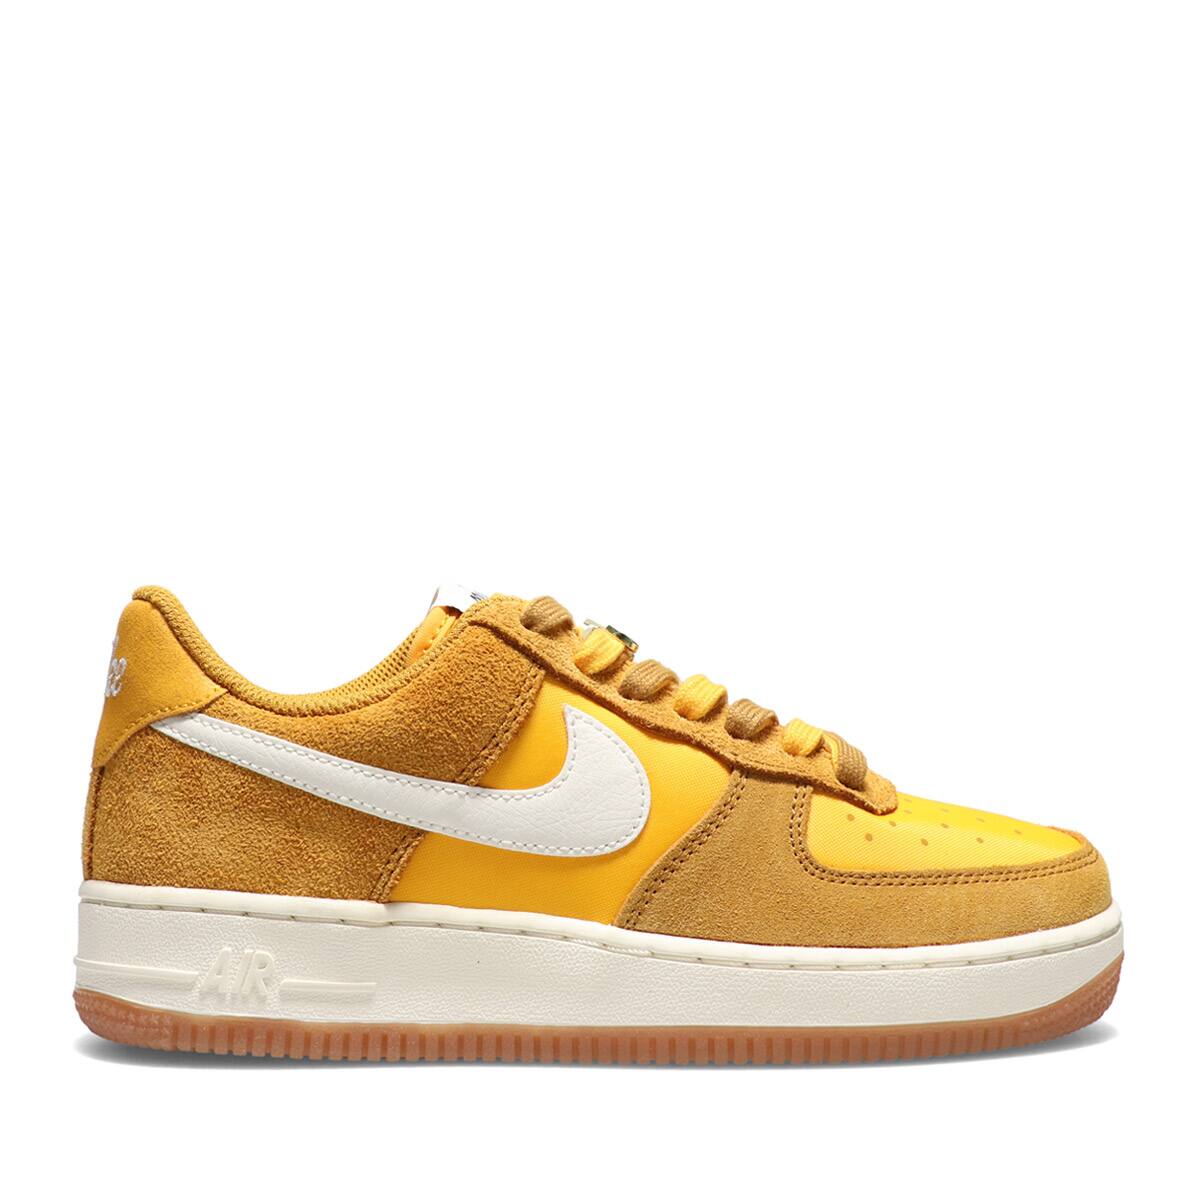 NIKE WMNS AIR FORCE 1 '07 SE GOLD SUEDE/SAIL-UNIVERSITY GOLD 21FA-Iスニーカー